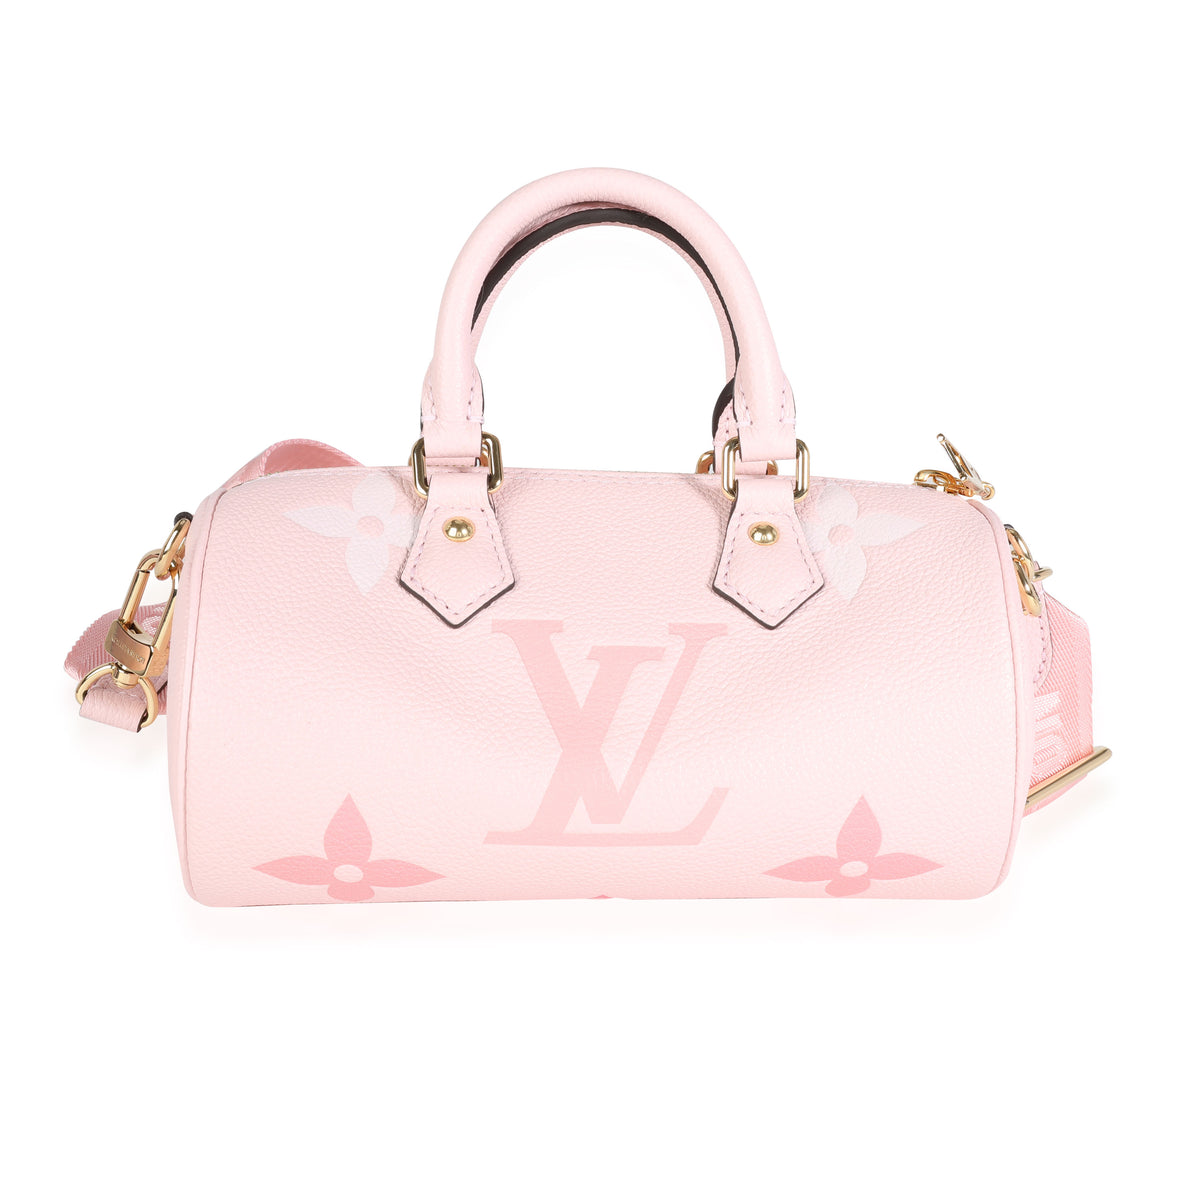 Louis Vuitton - Authenticated Papillon Bb Handbag - Leather Pink for Women, Very Good Condition